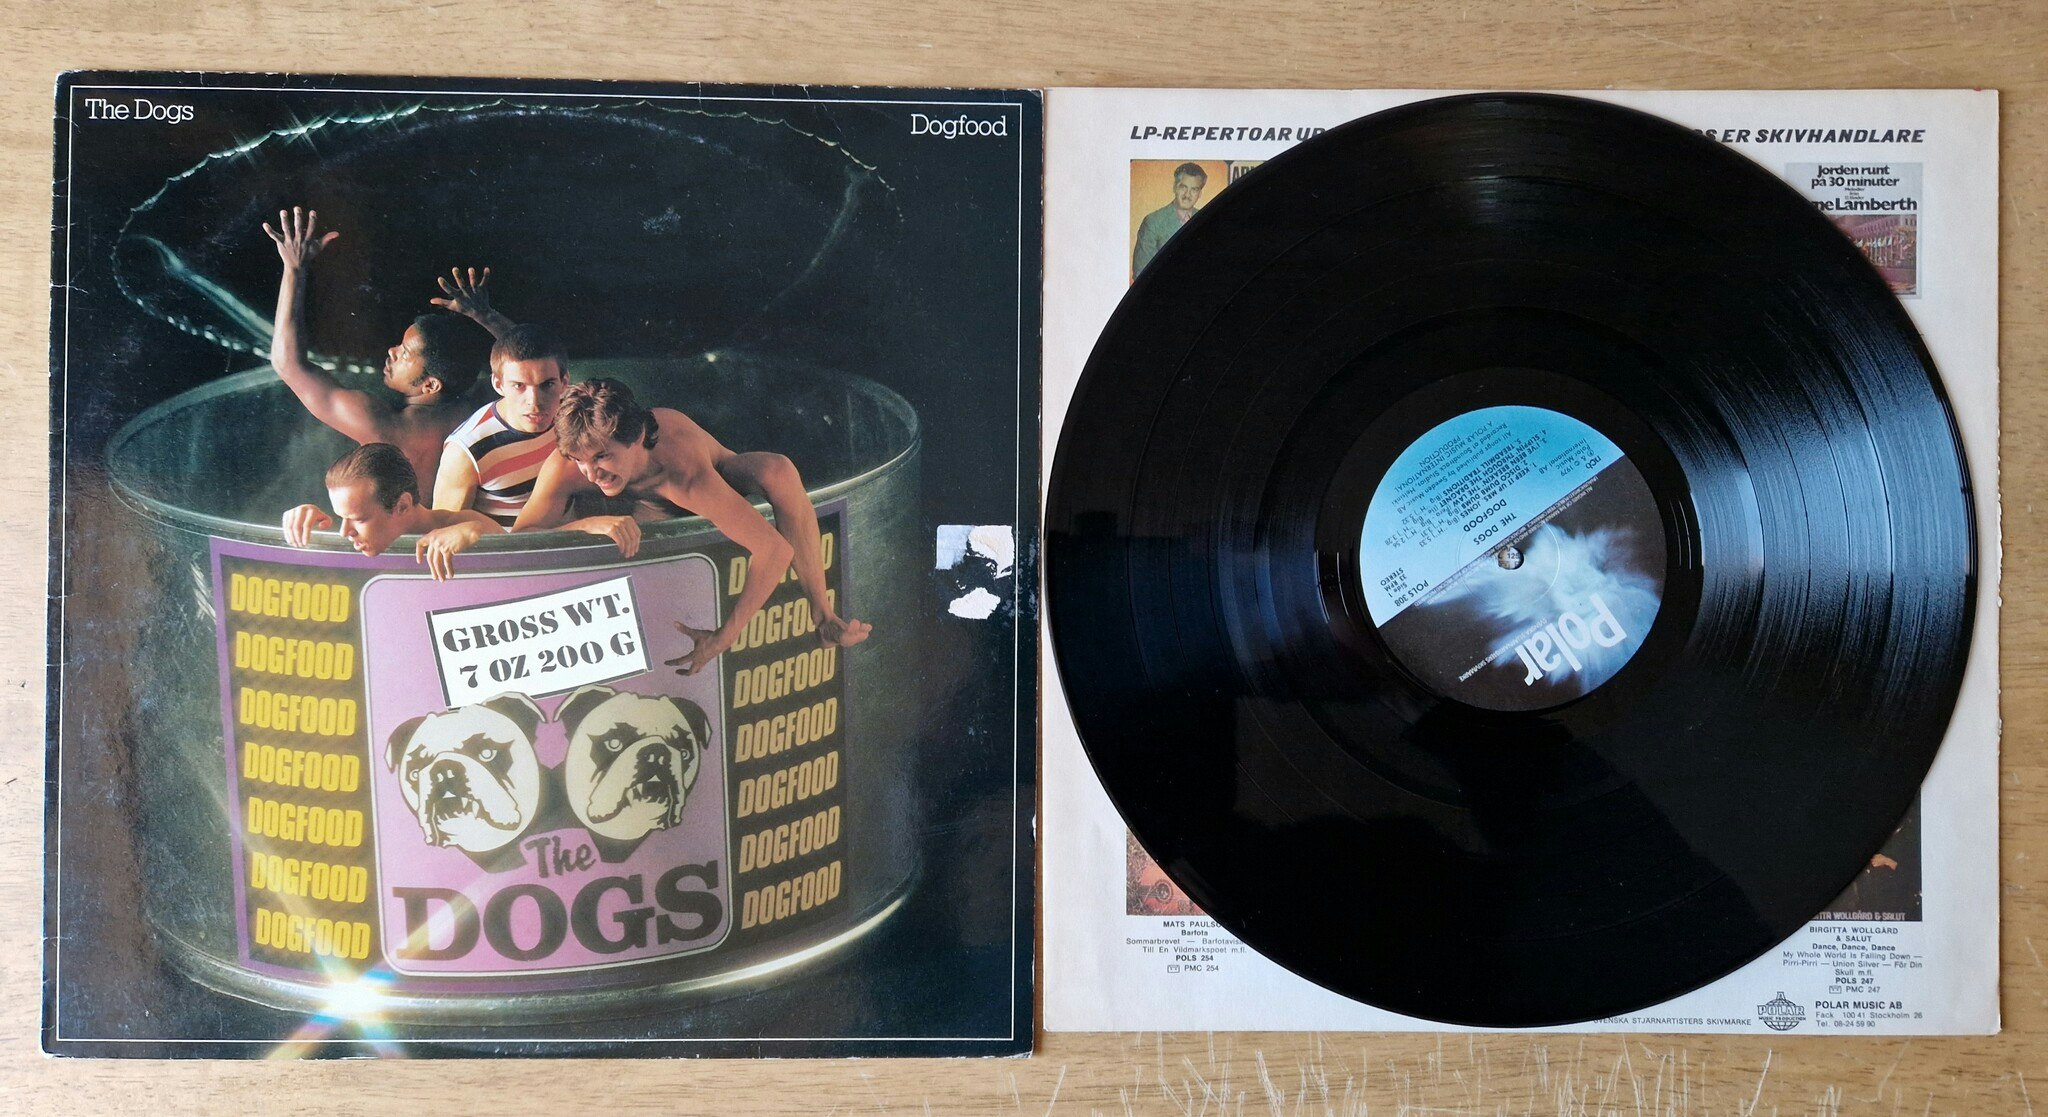 Pera and The Dogs, Dogfood. Vinyl LP